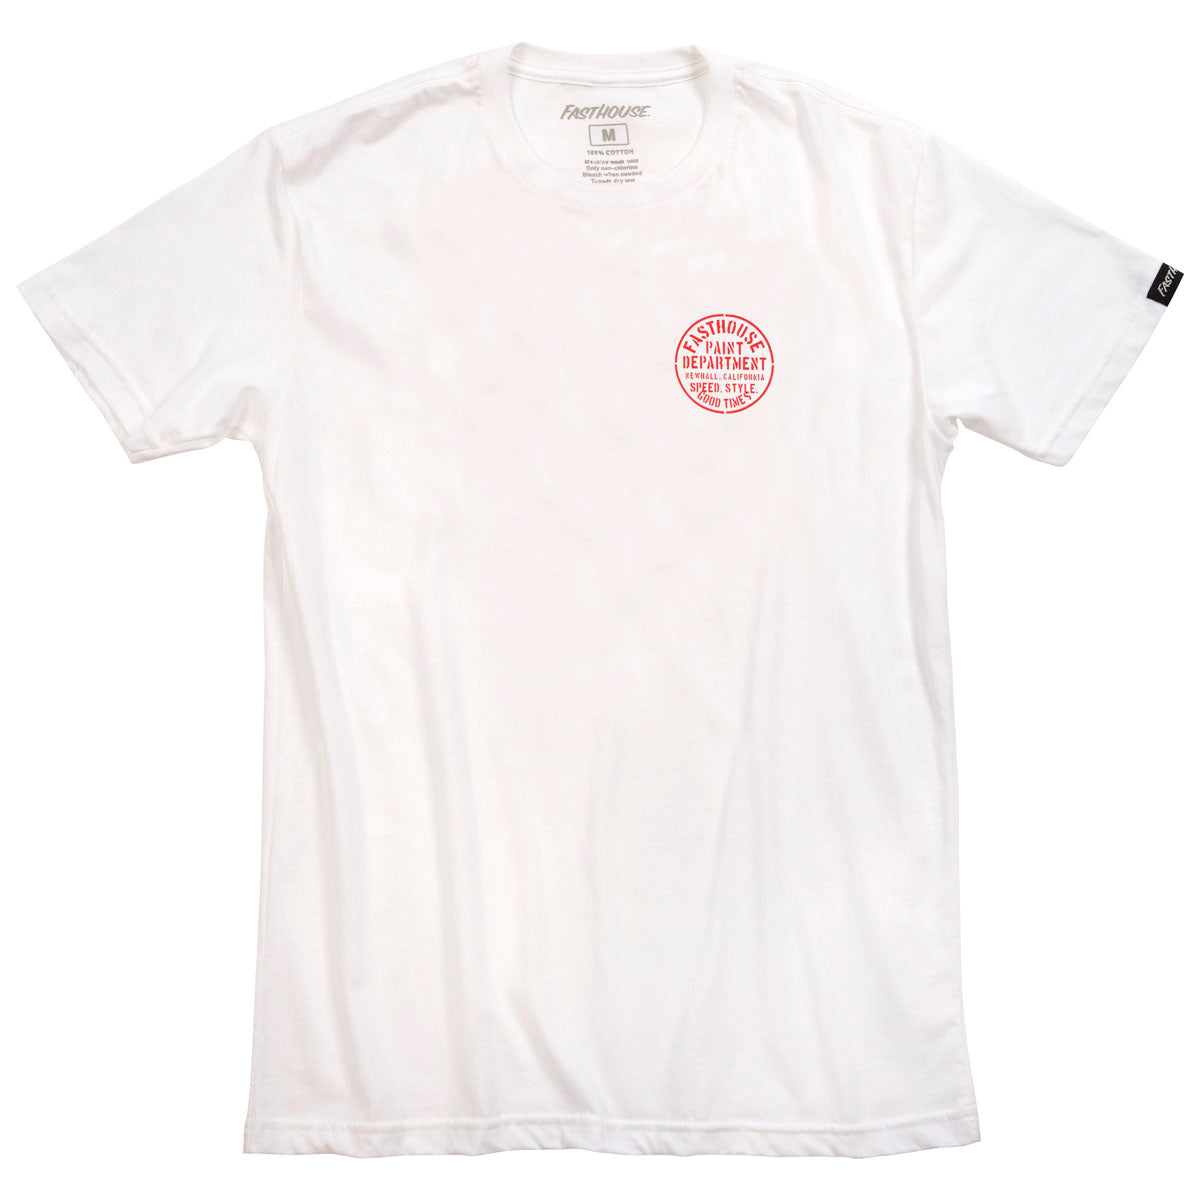 Fasthouse Paint Dept Tee - White